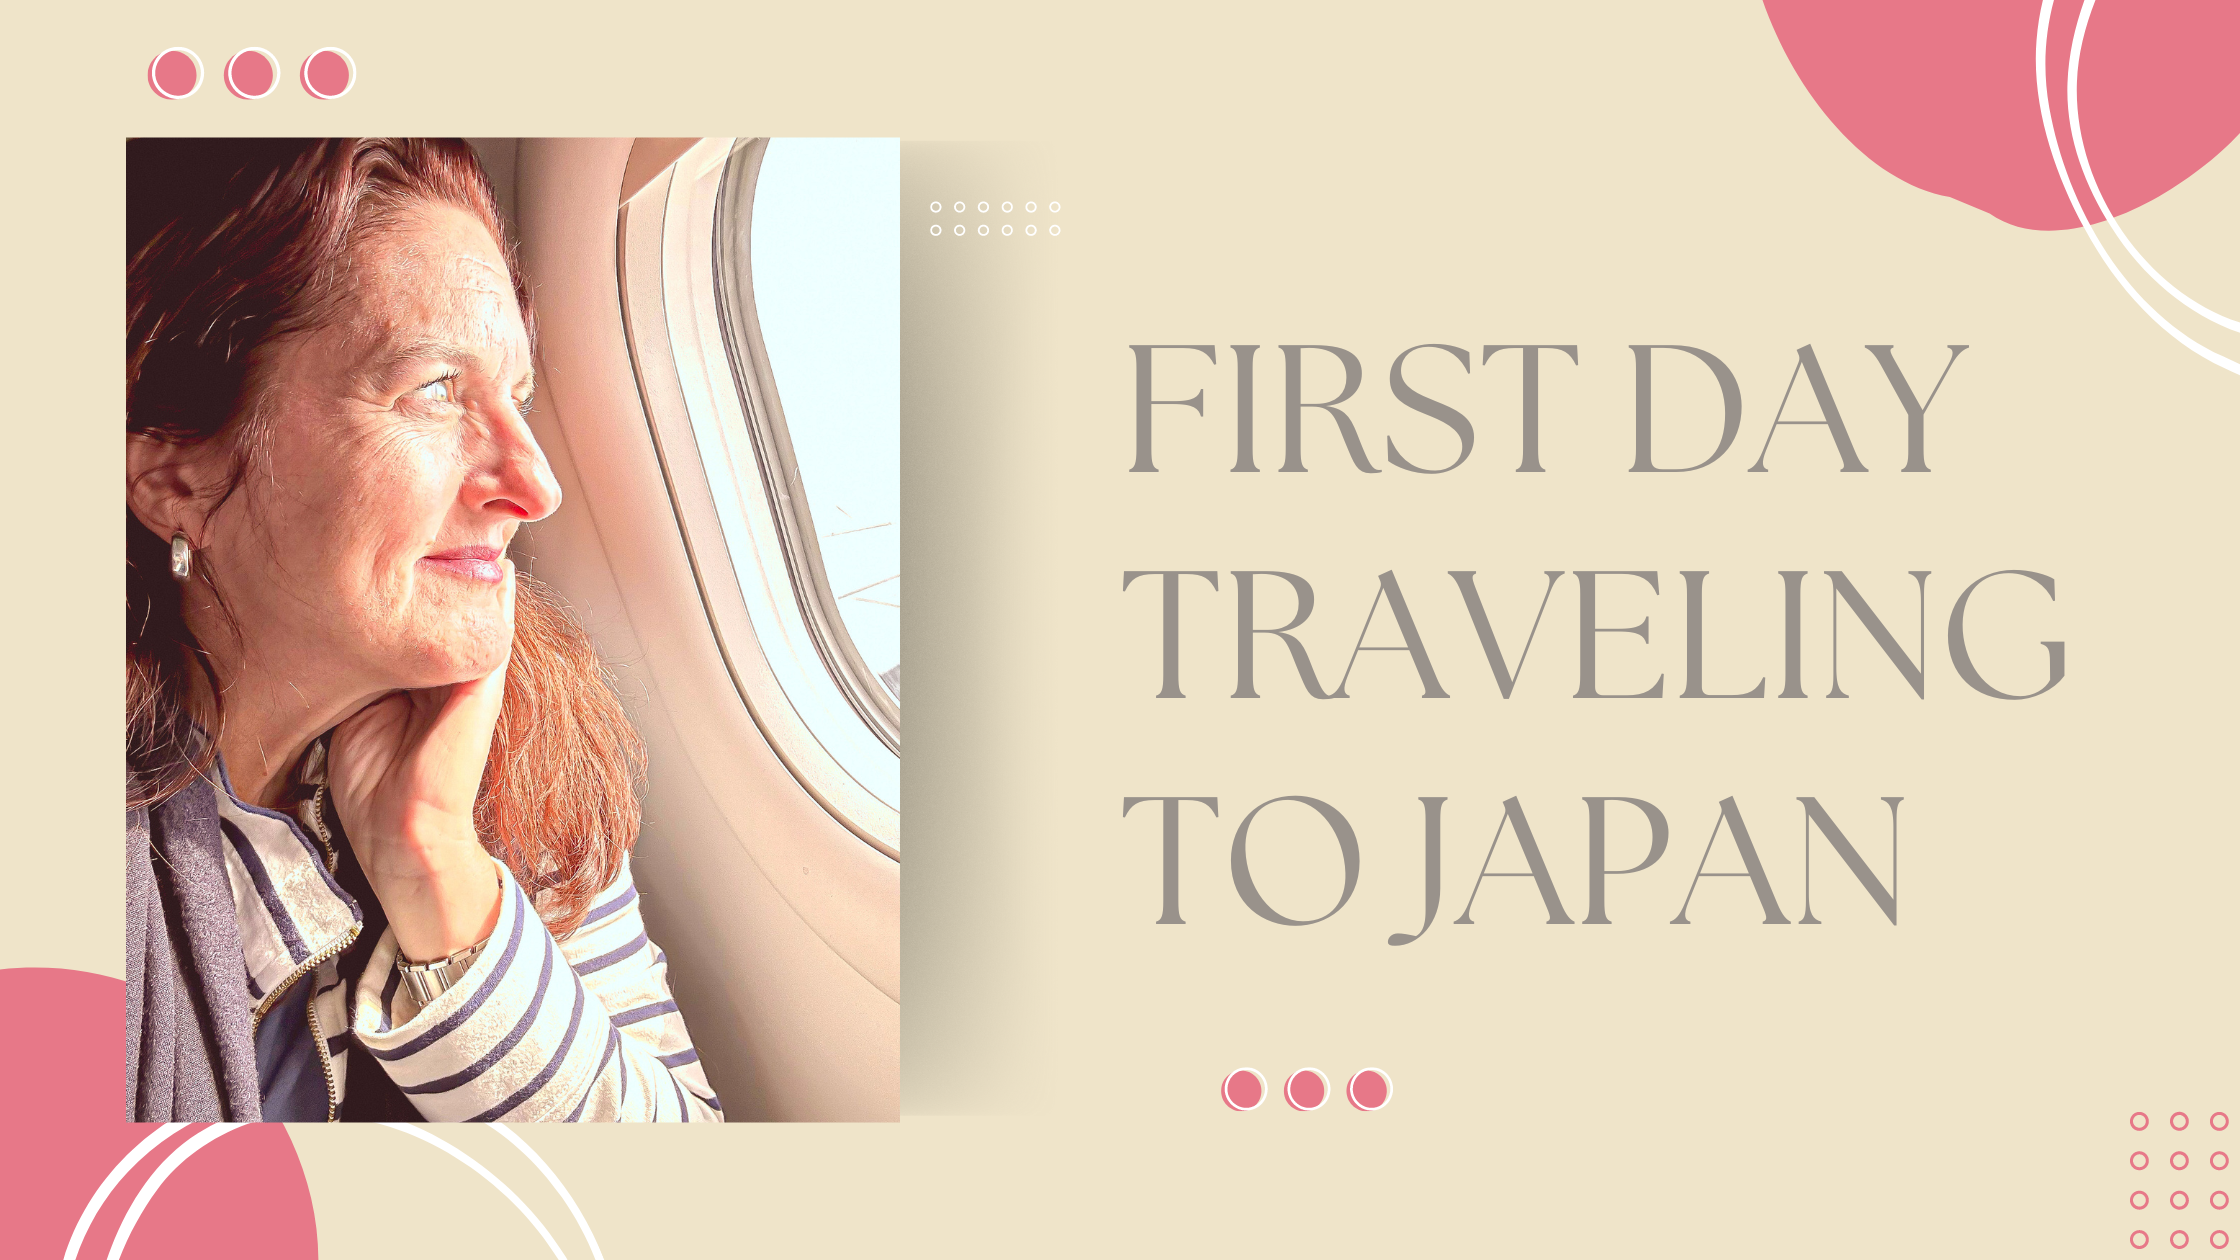 My First Day Traveling to Japan!